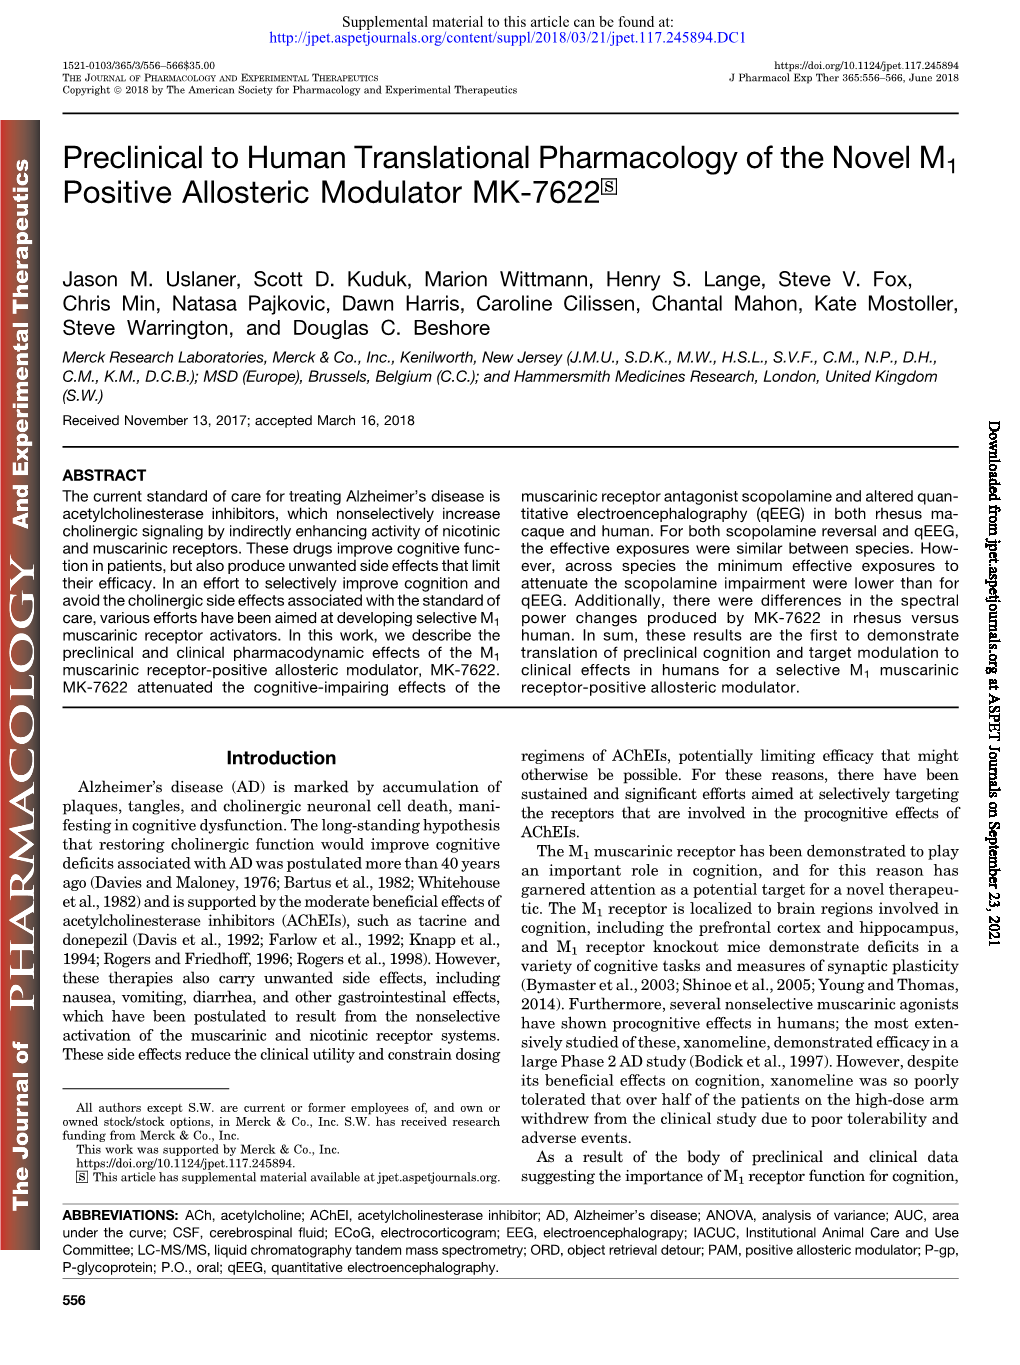 Preclinical to Human Translational Pharmacology of the Novel M1 Positive Allosteric Modulator MK-7622 S